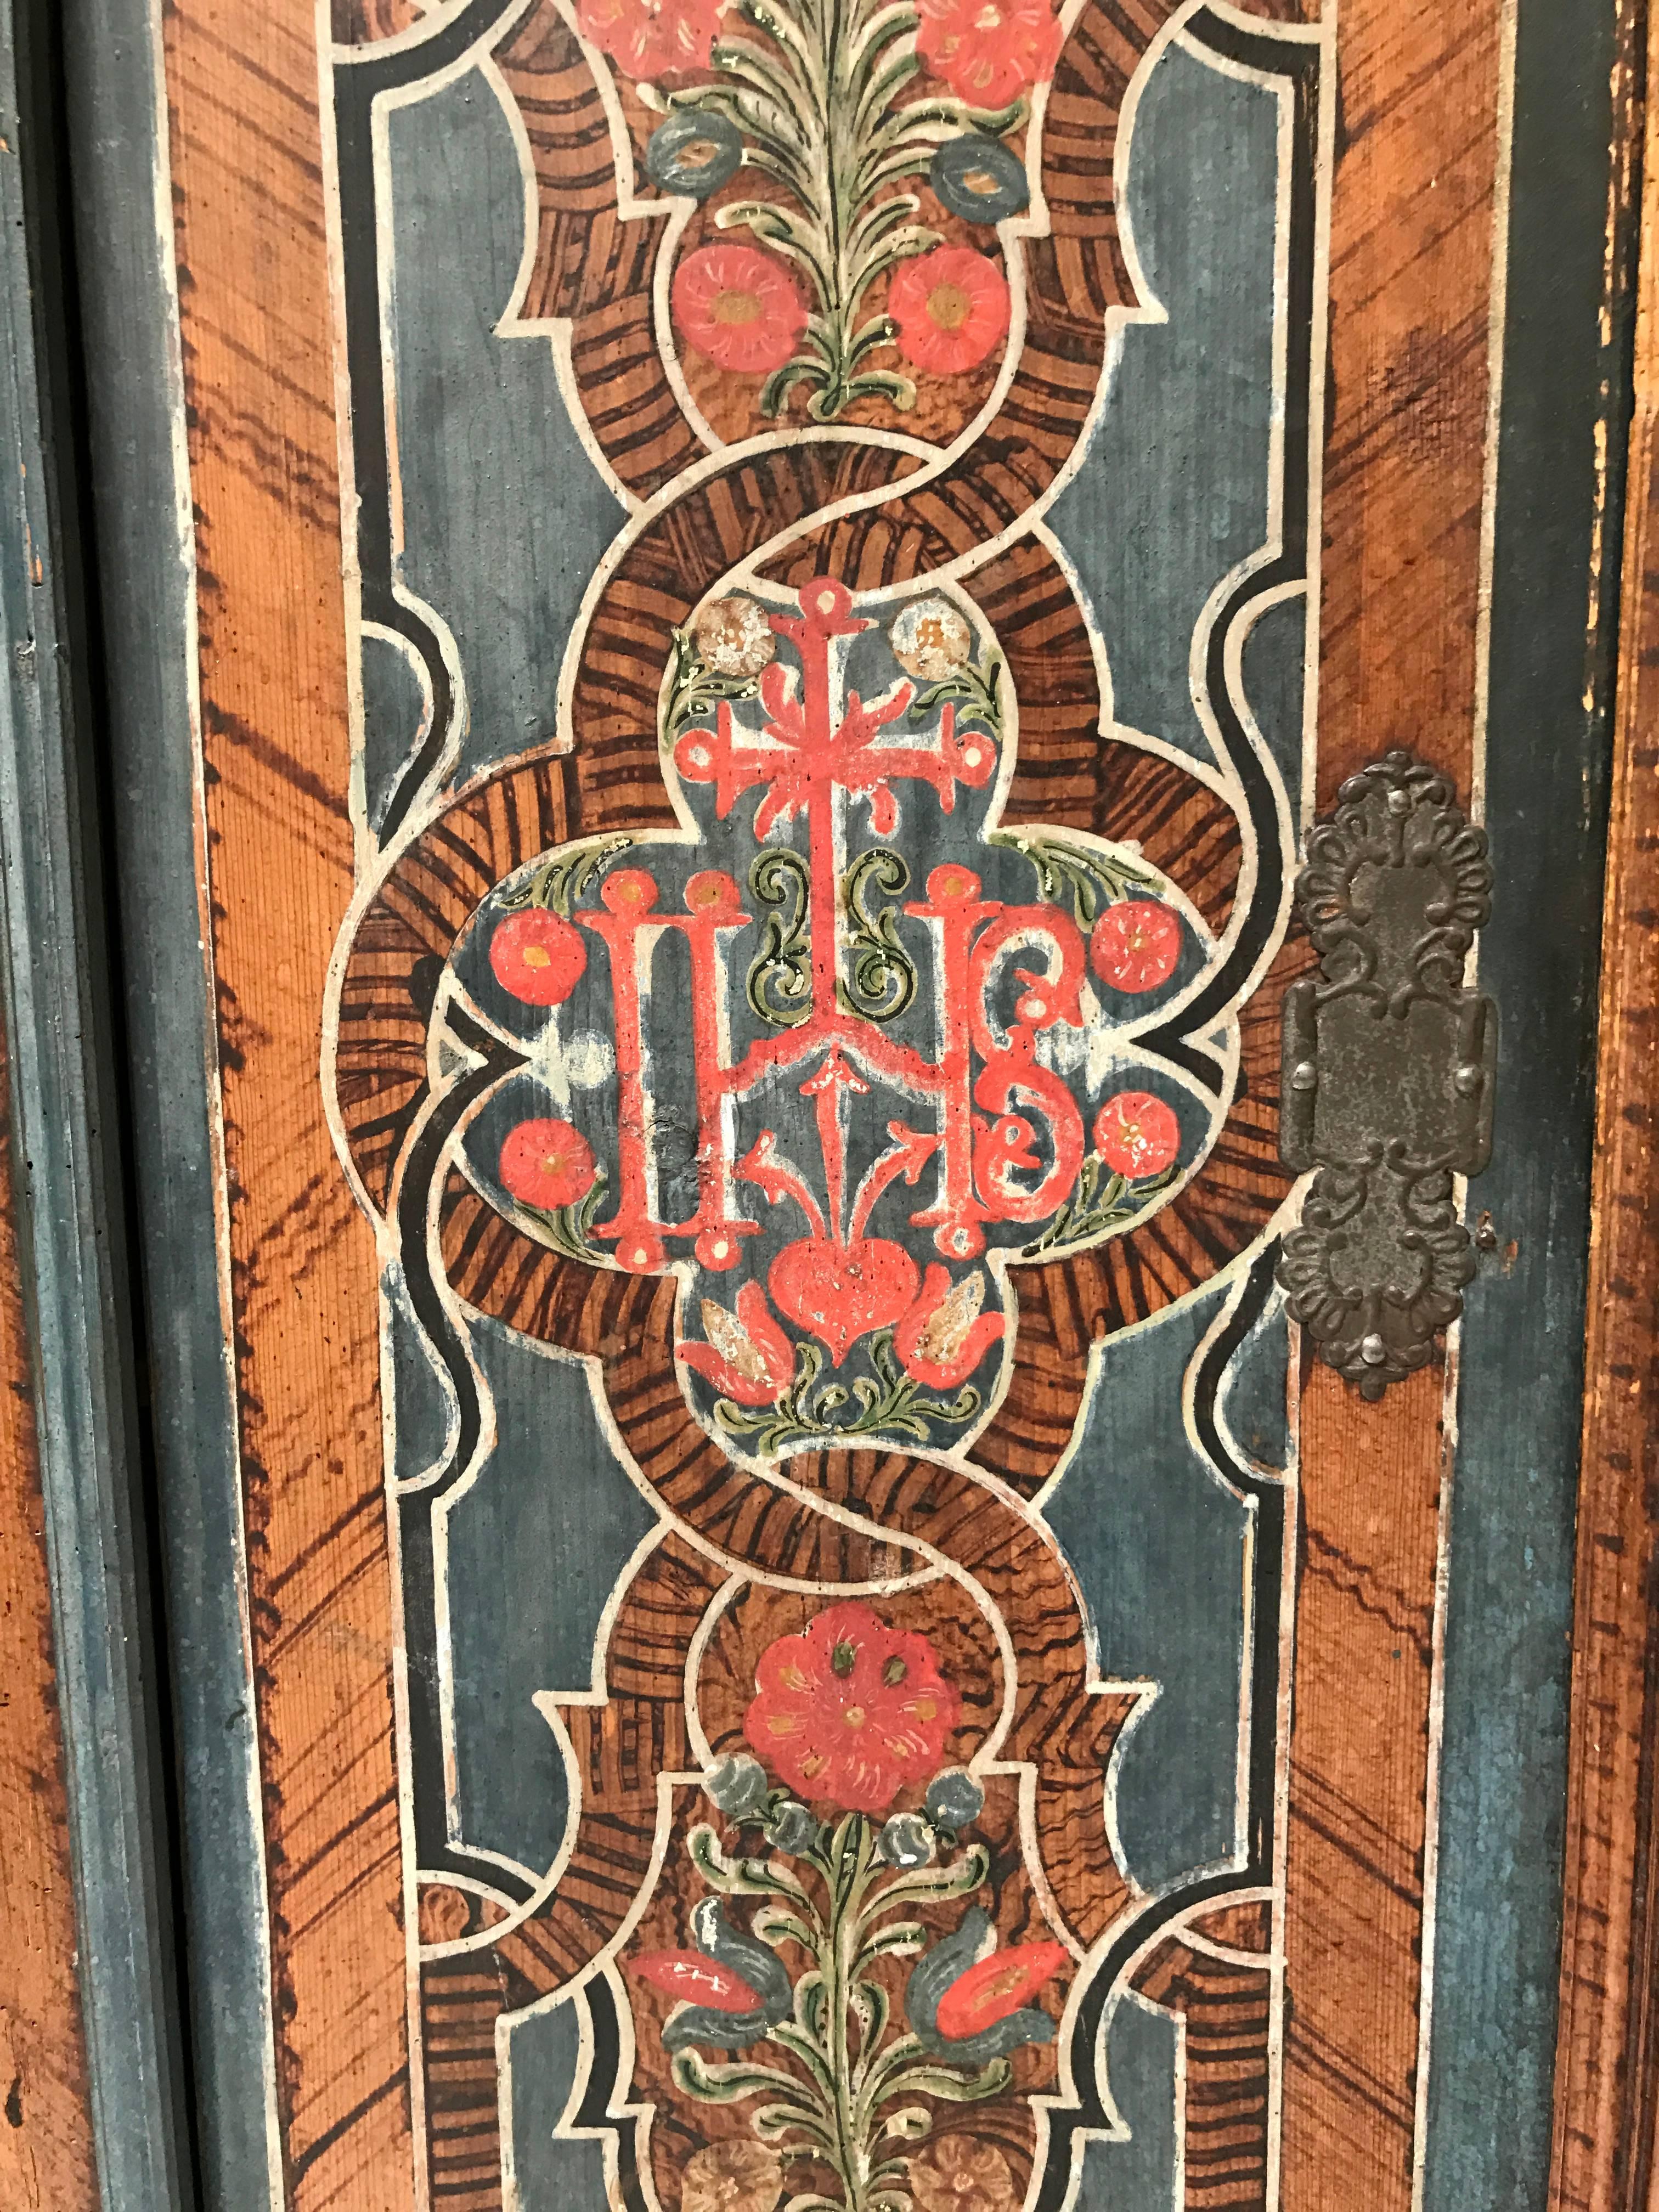 Highly decorative 18th century painted marriage armoire from Lithuania, with beautiful and intricate painting of flowers and geometric motifs, lovely patina, marked M and K at top of each door, 1786 date painted across top of two doors.